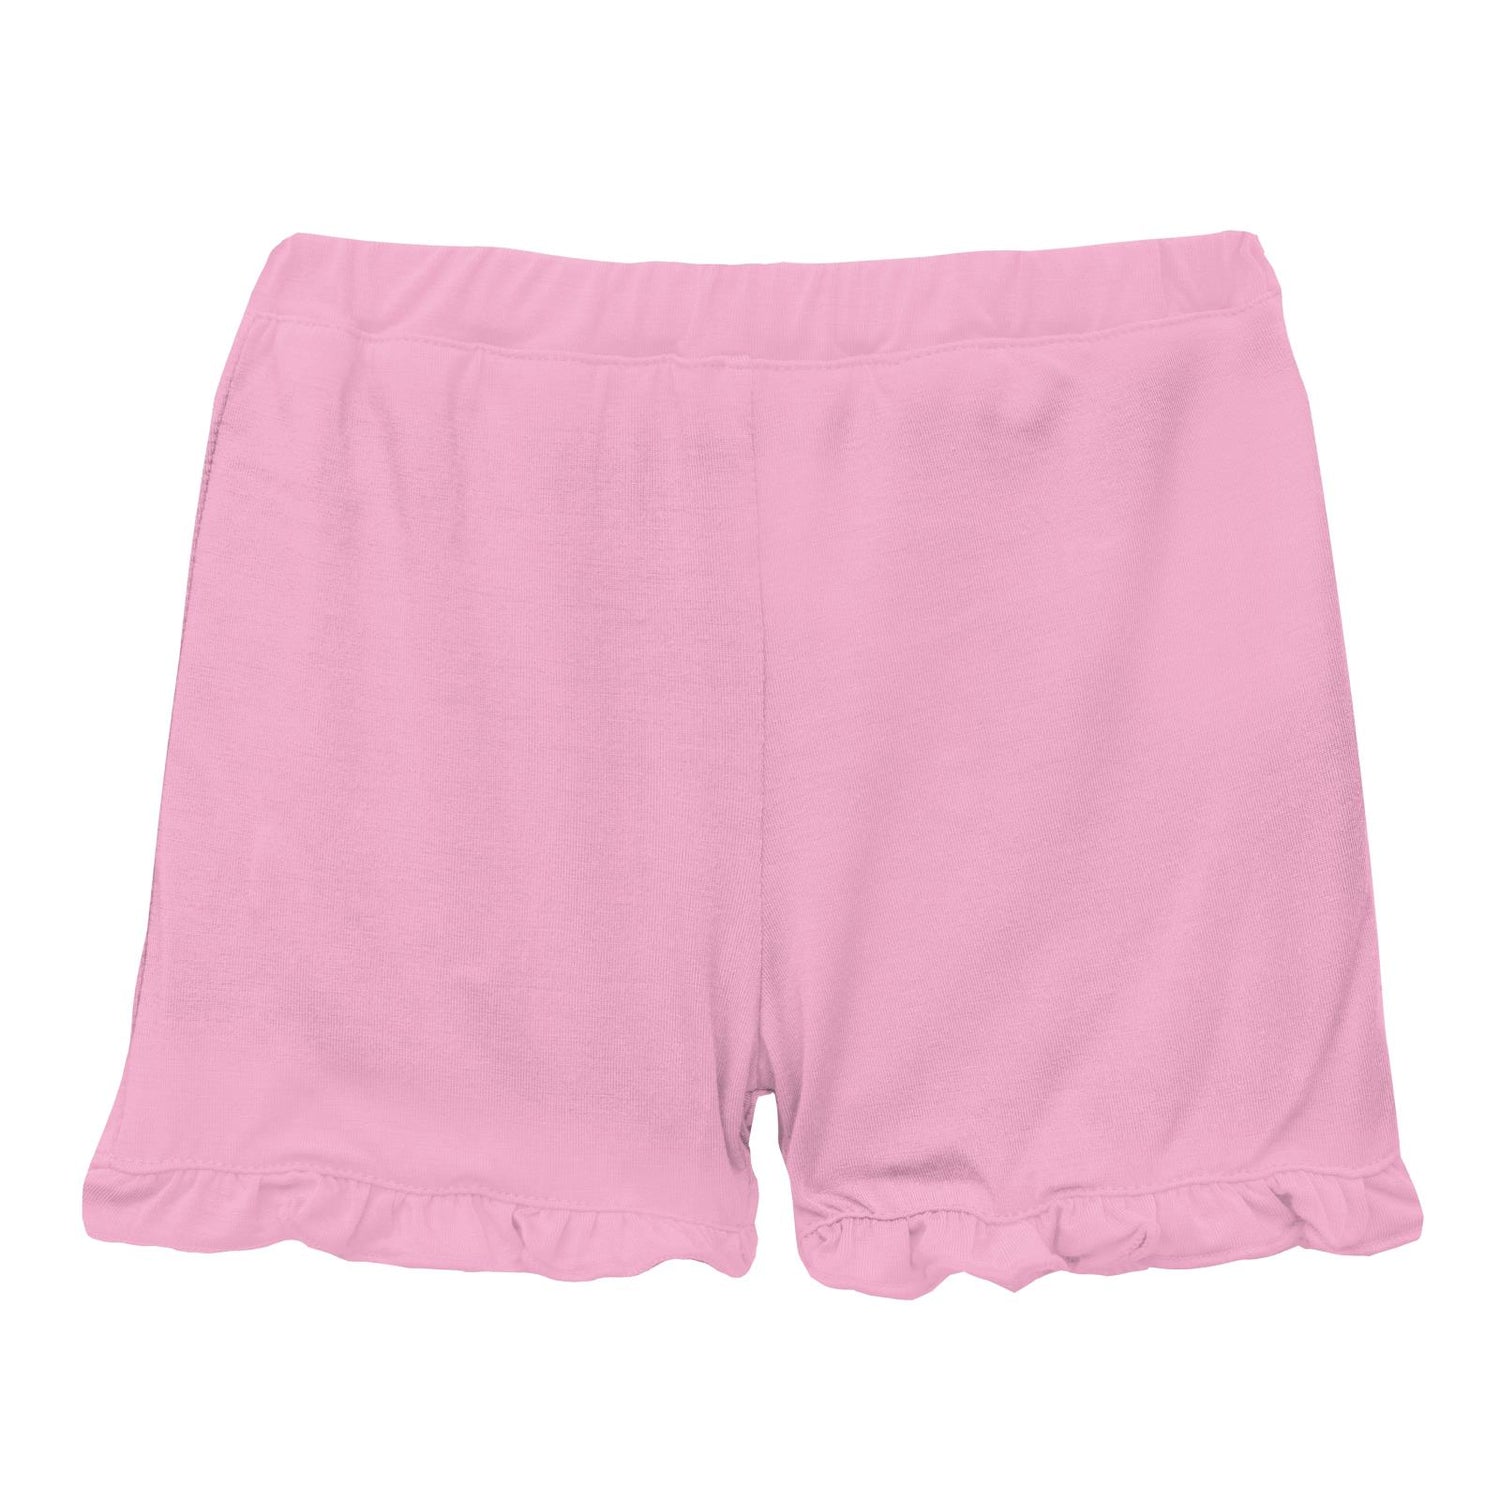 Ruffle Shorts in Cotton Candy